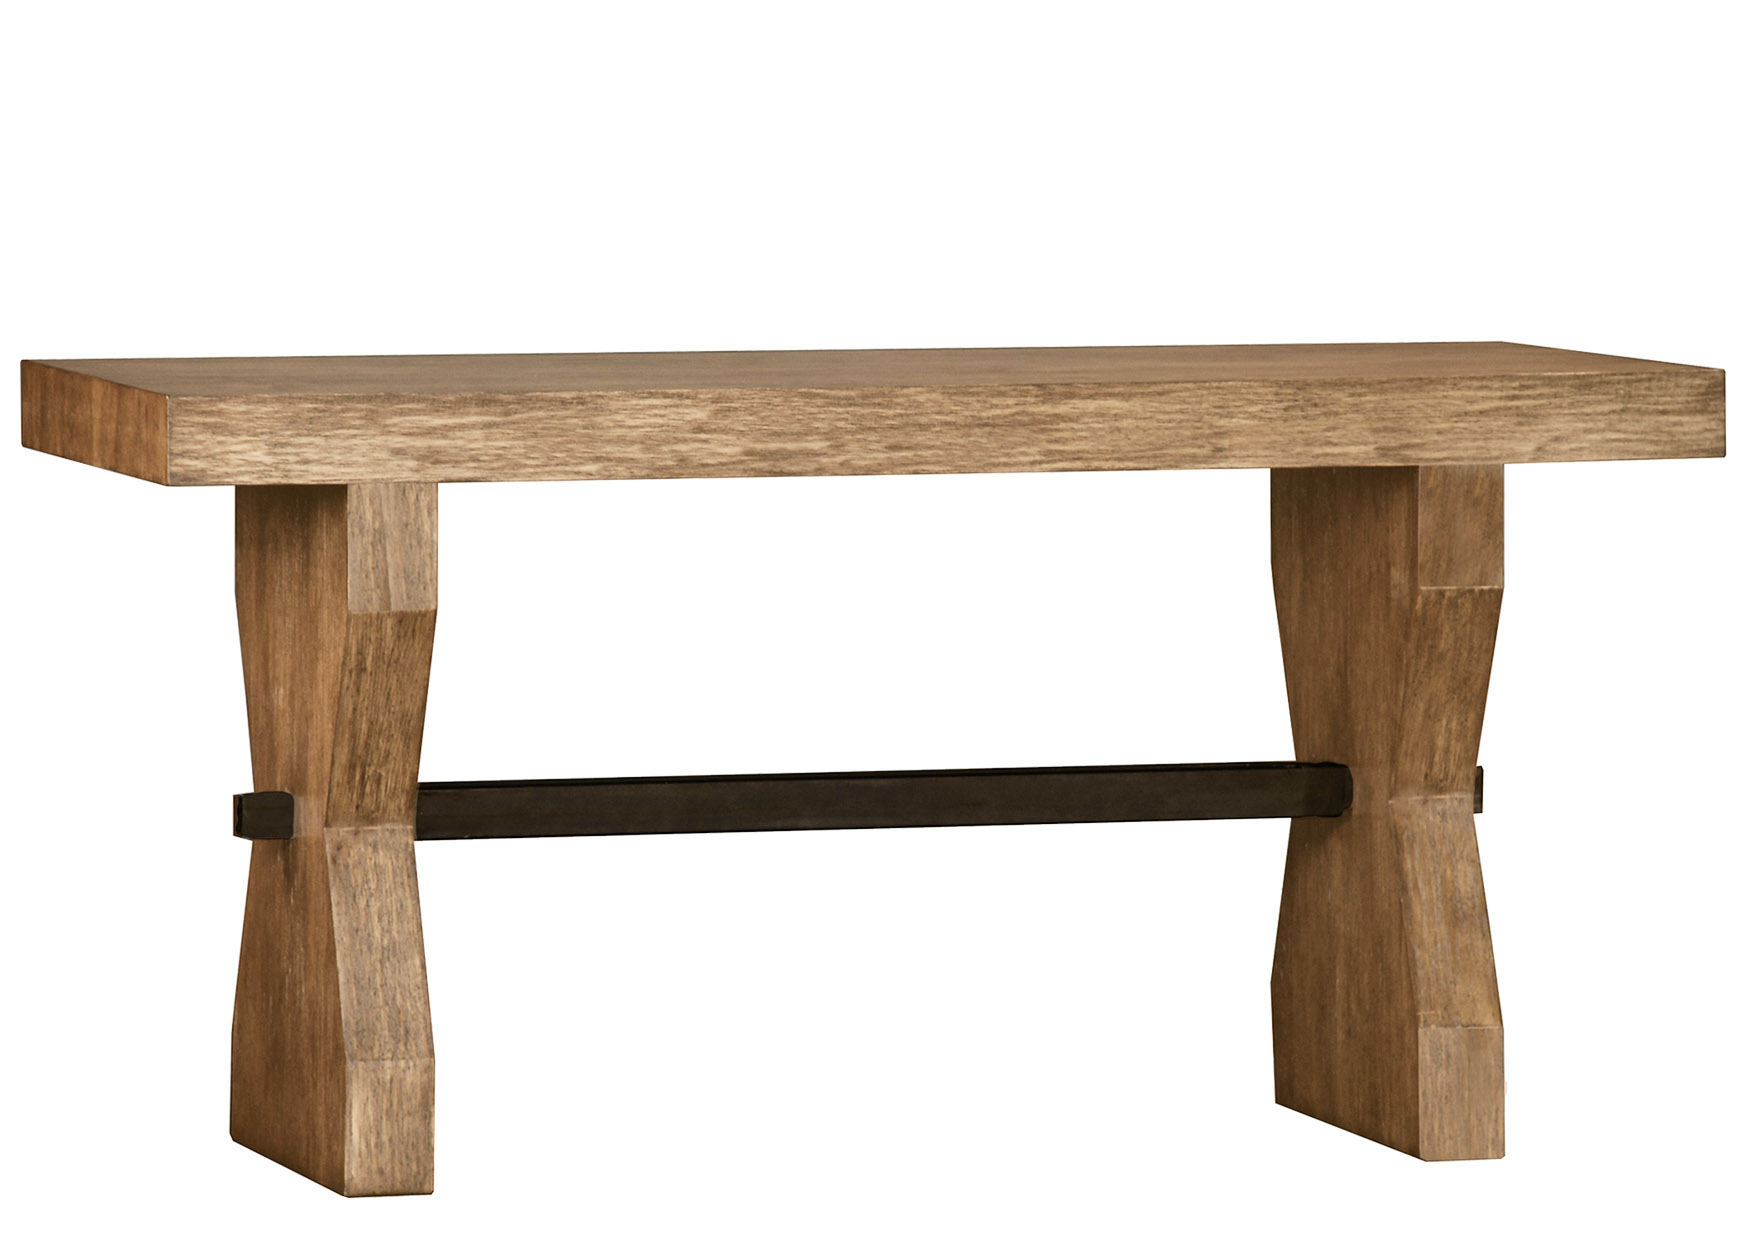 Basalt contemporary rustic sofa table console table in wirebrushed oak finish by Woodland